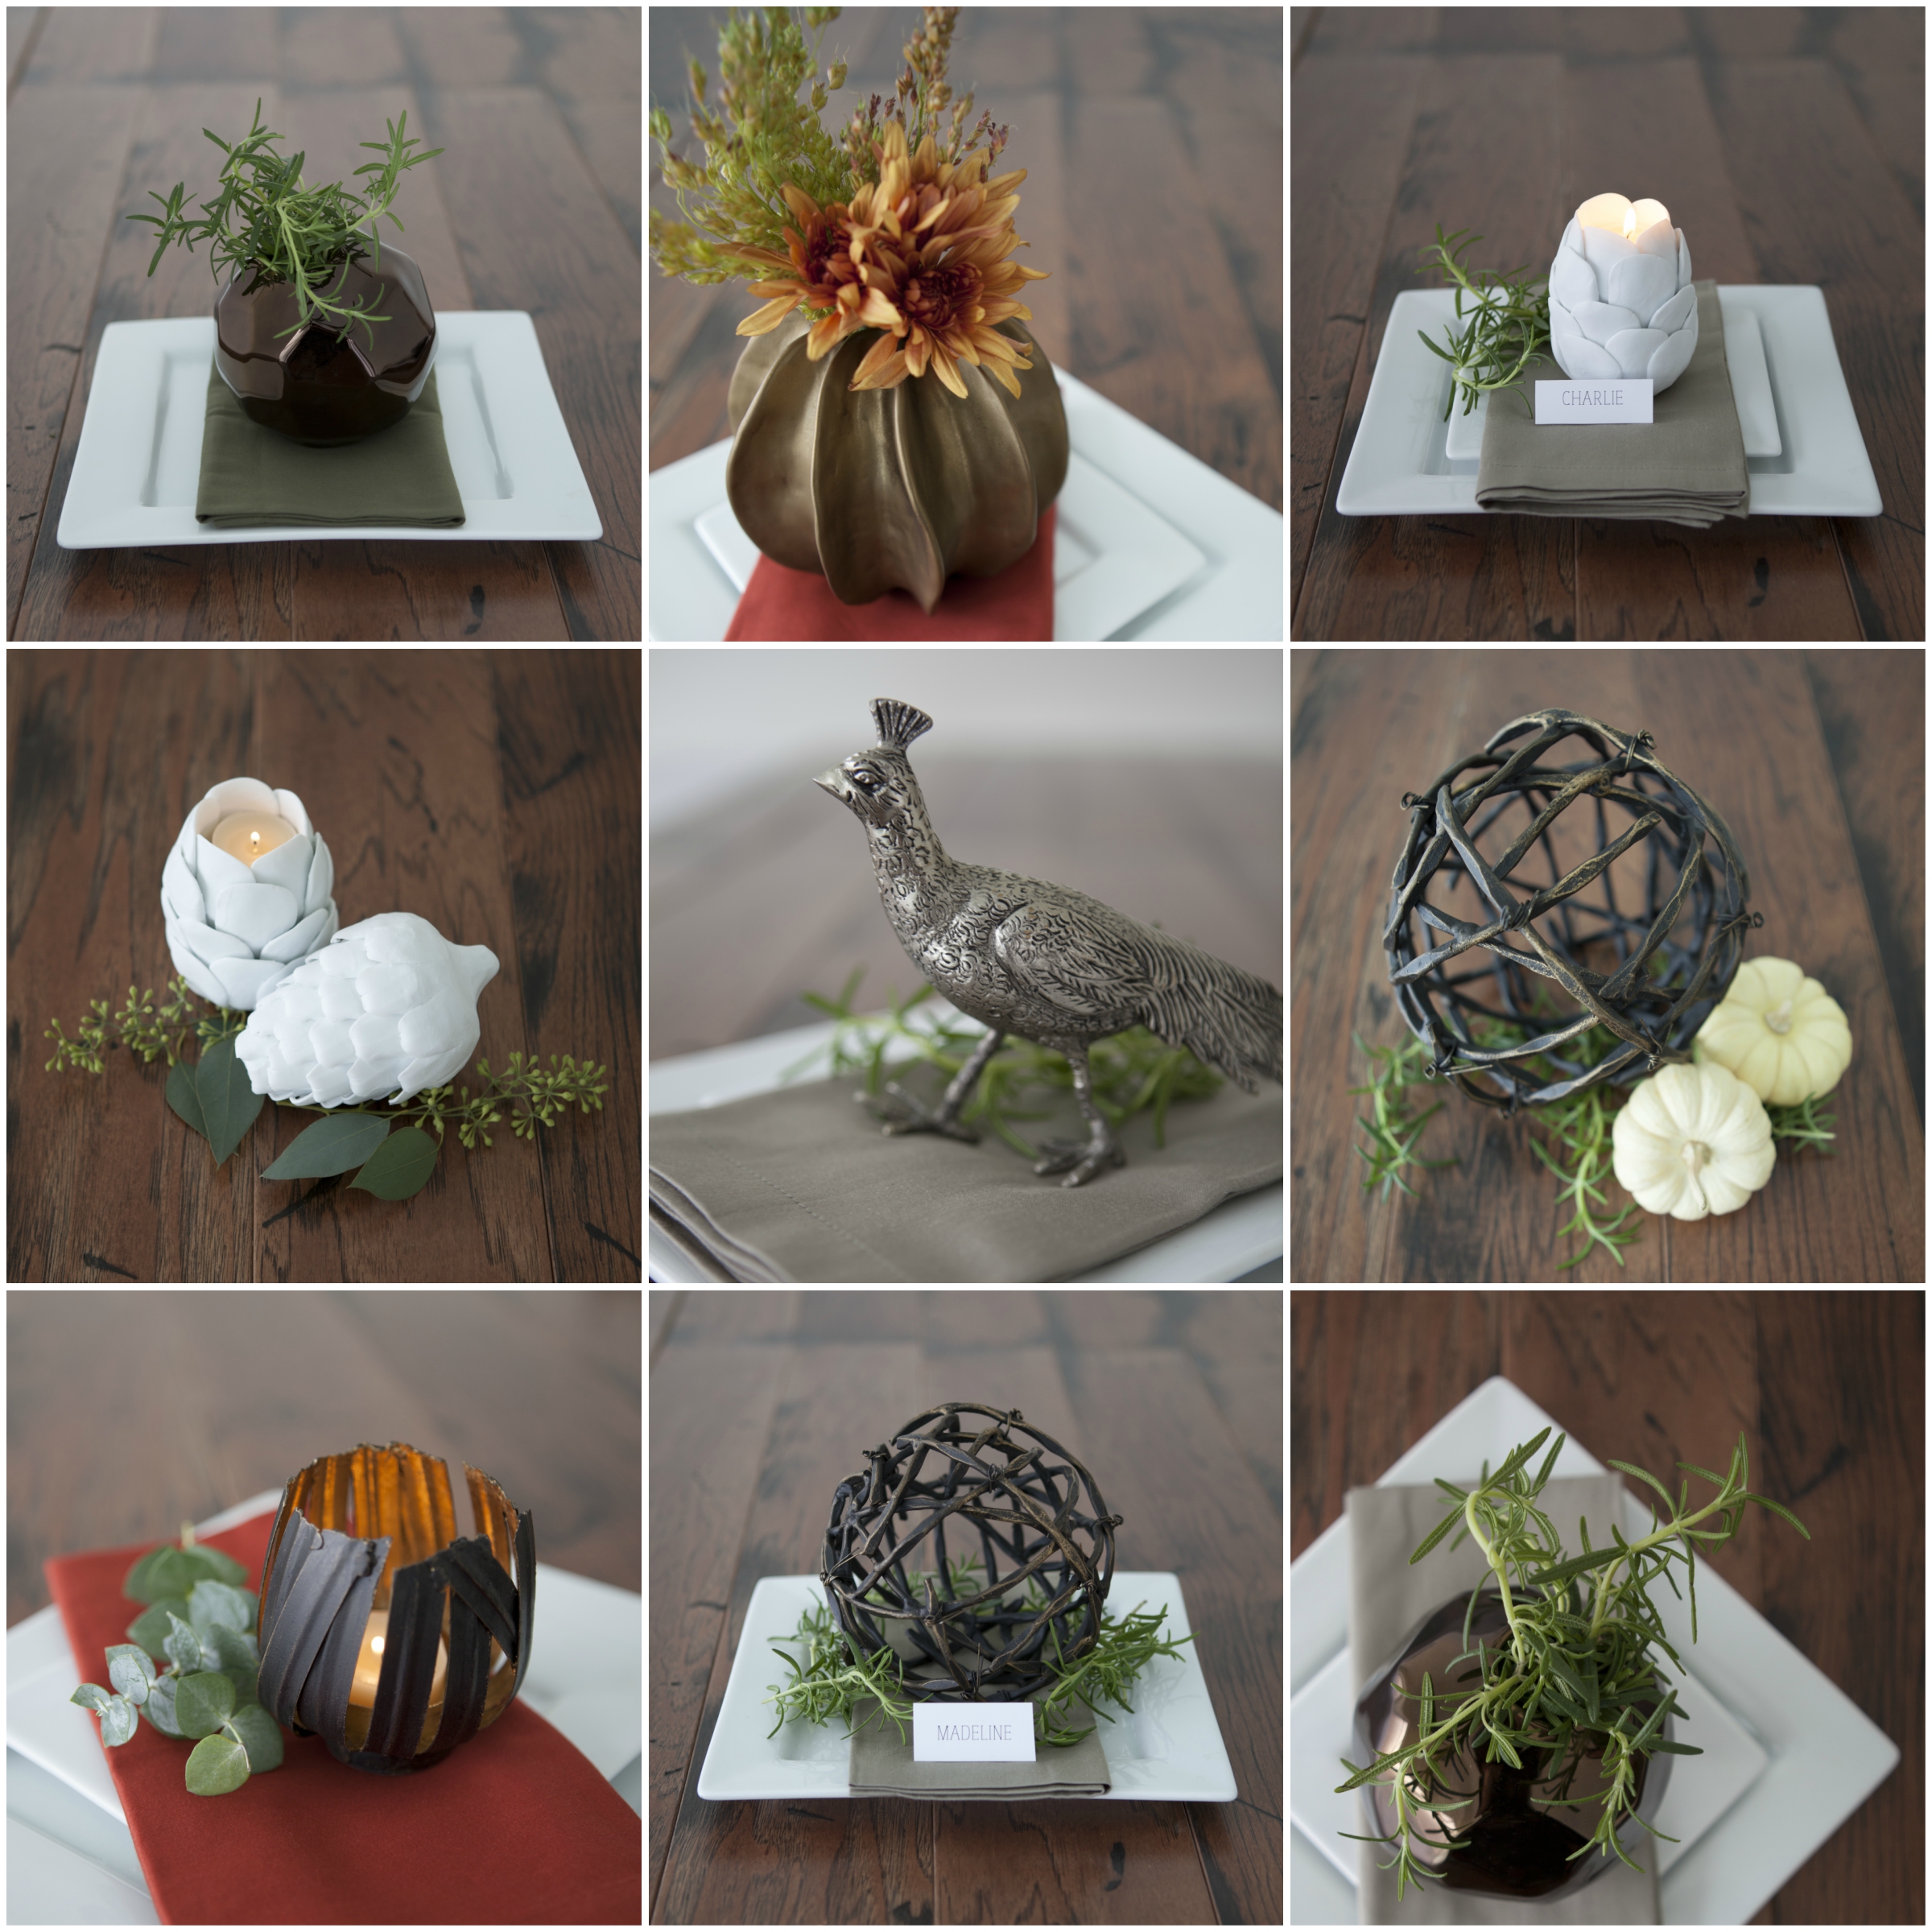 Dress Your Holiday Table with Global Views and Studio A